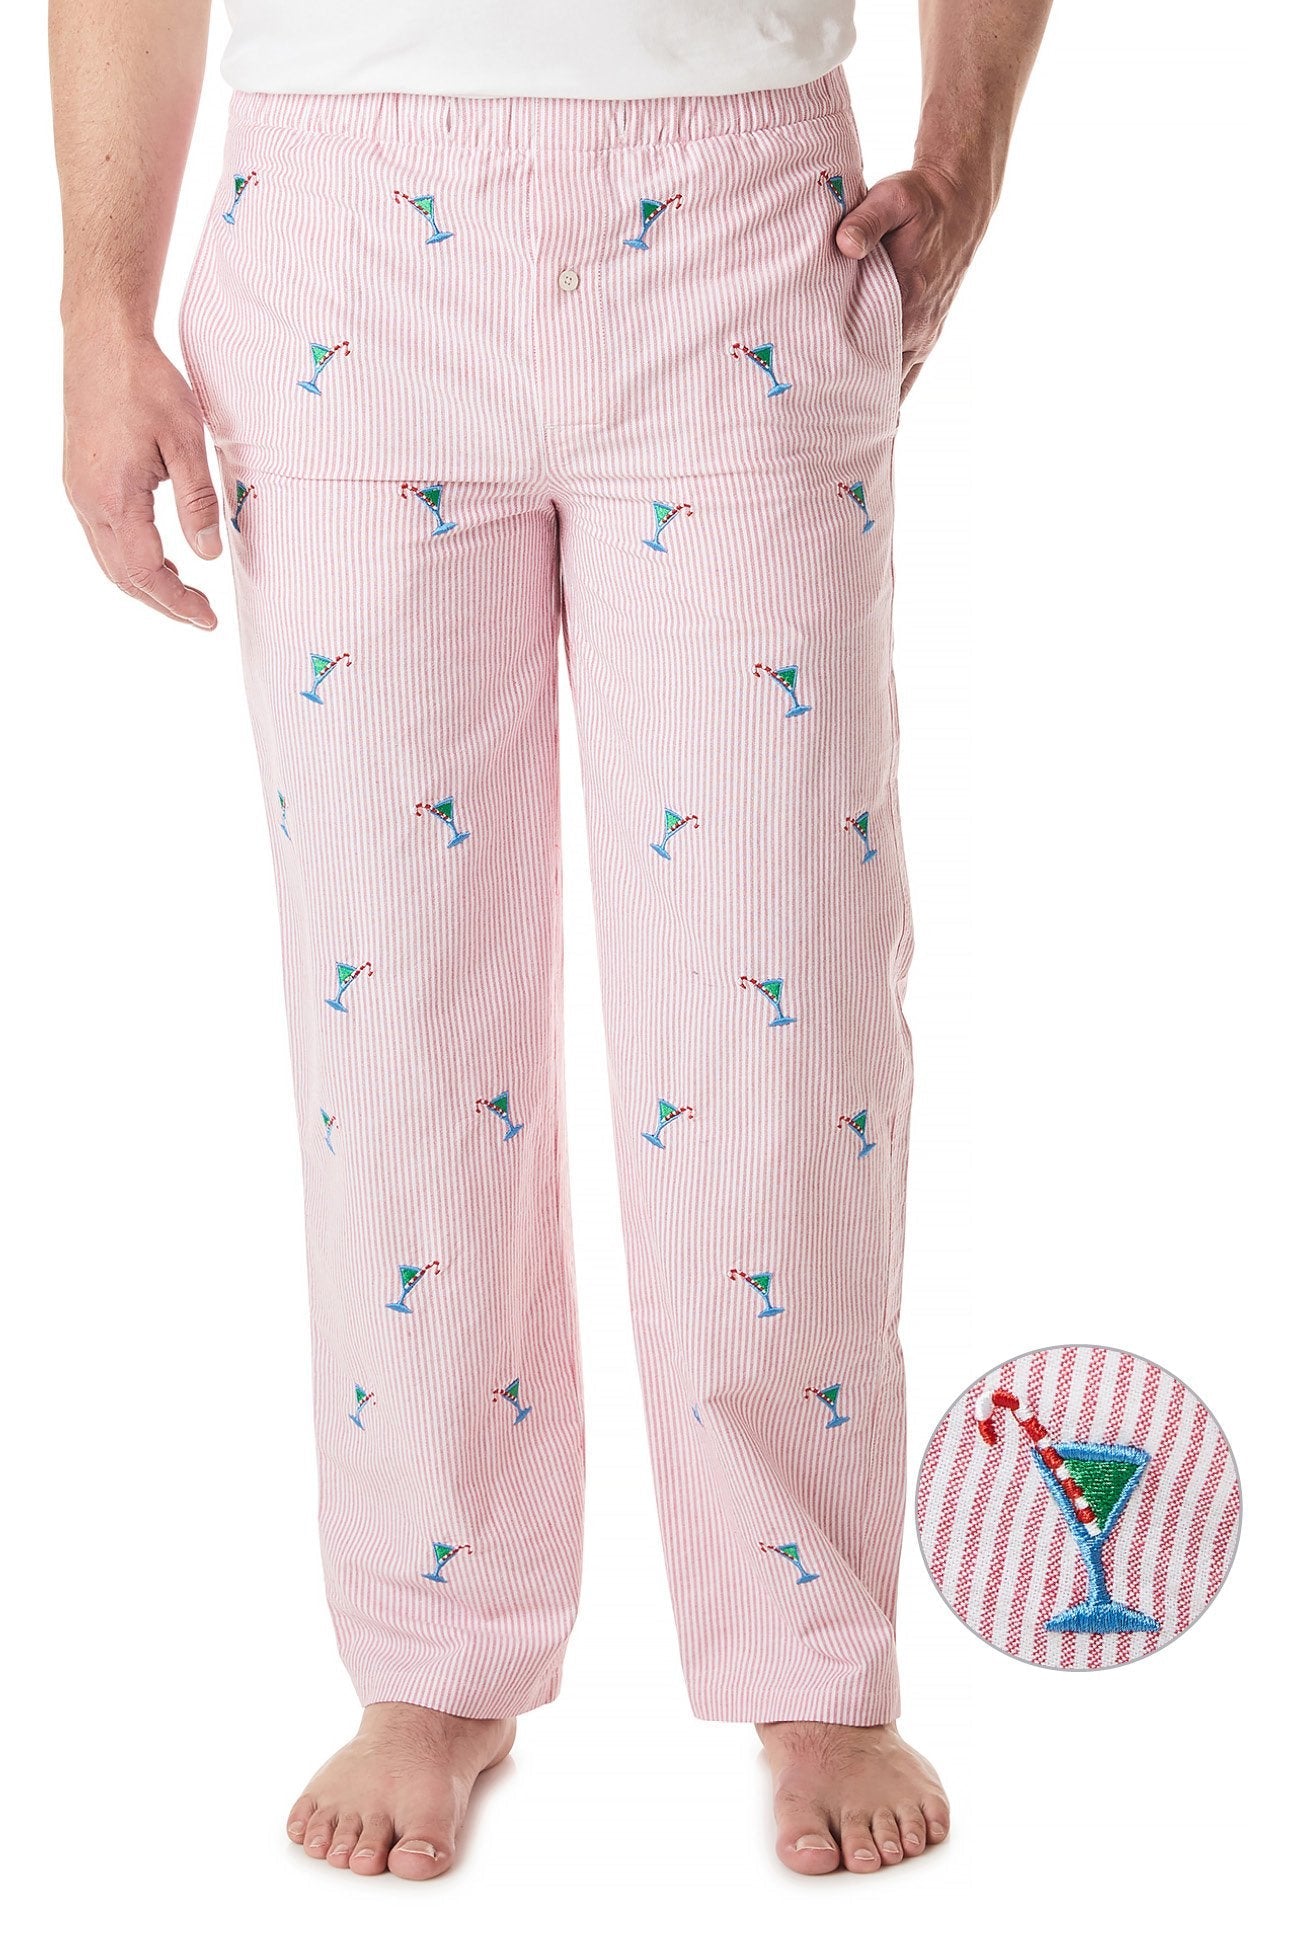 Sleeper Pant Oxford Red Stripe with Martini Candy Cane - Castaway Nantucket Island